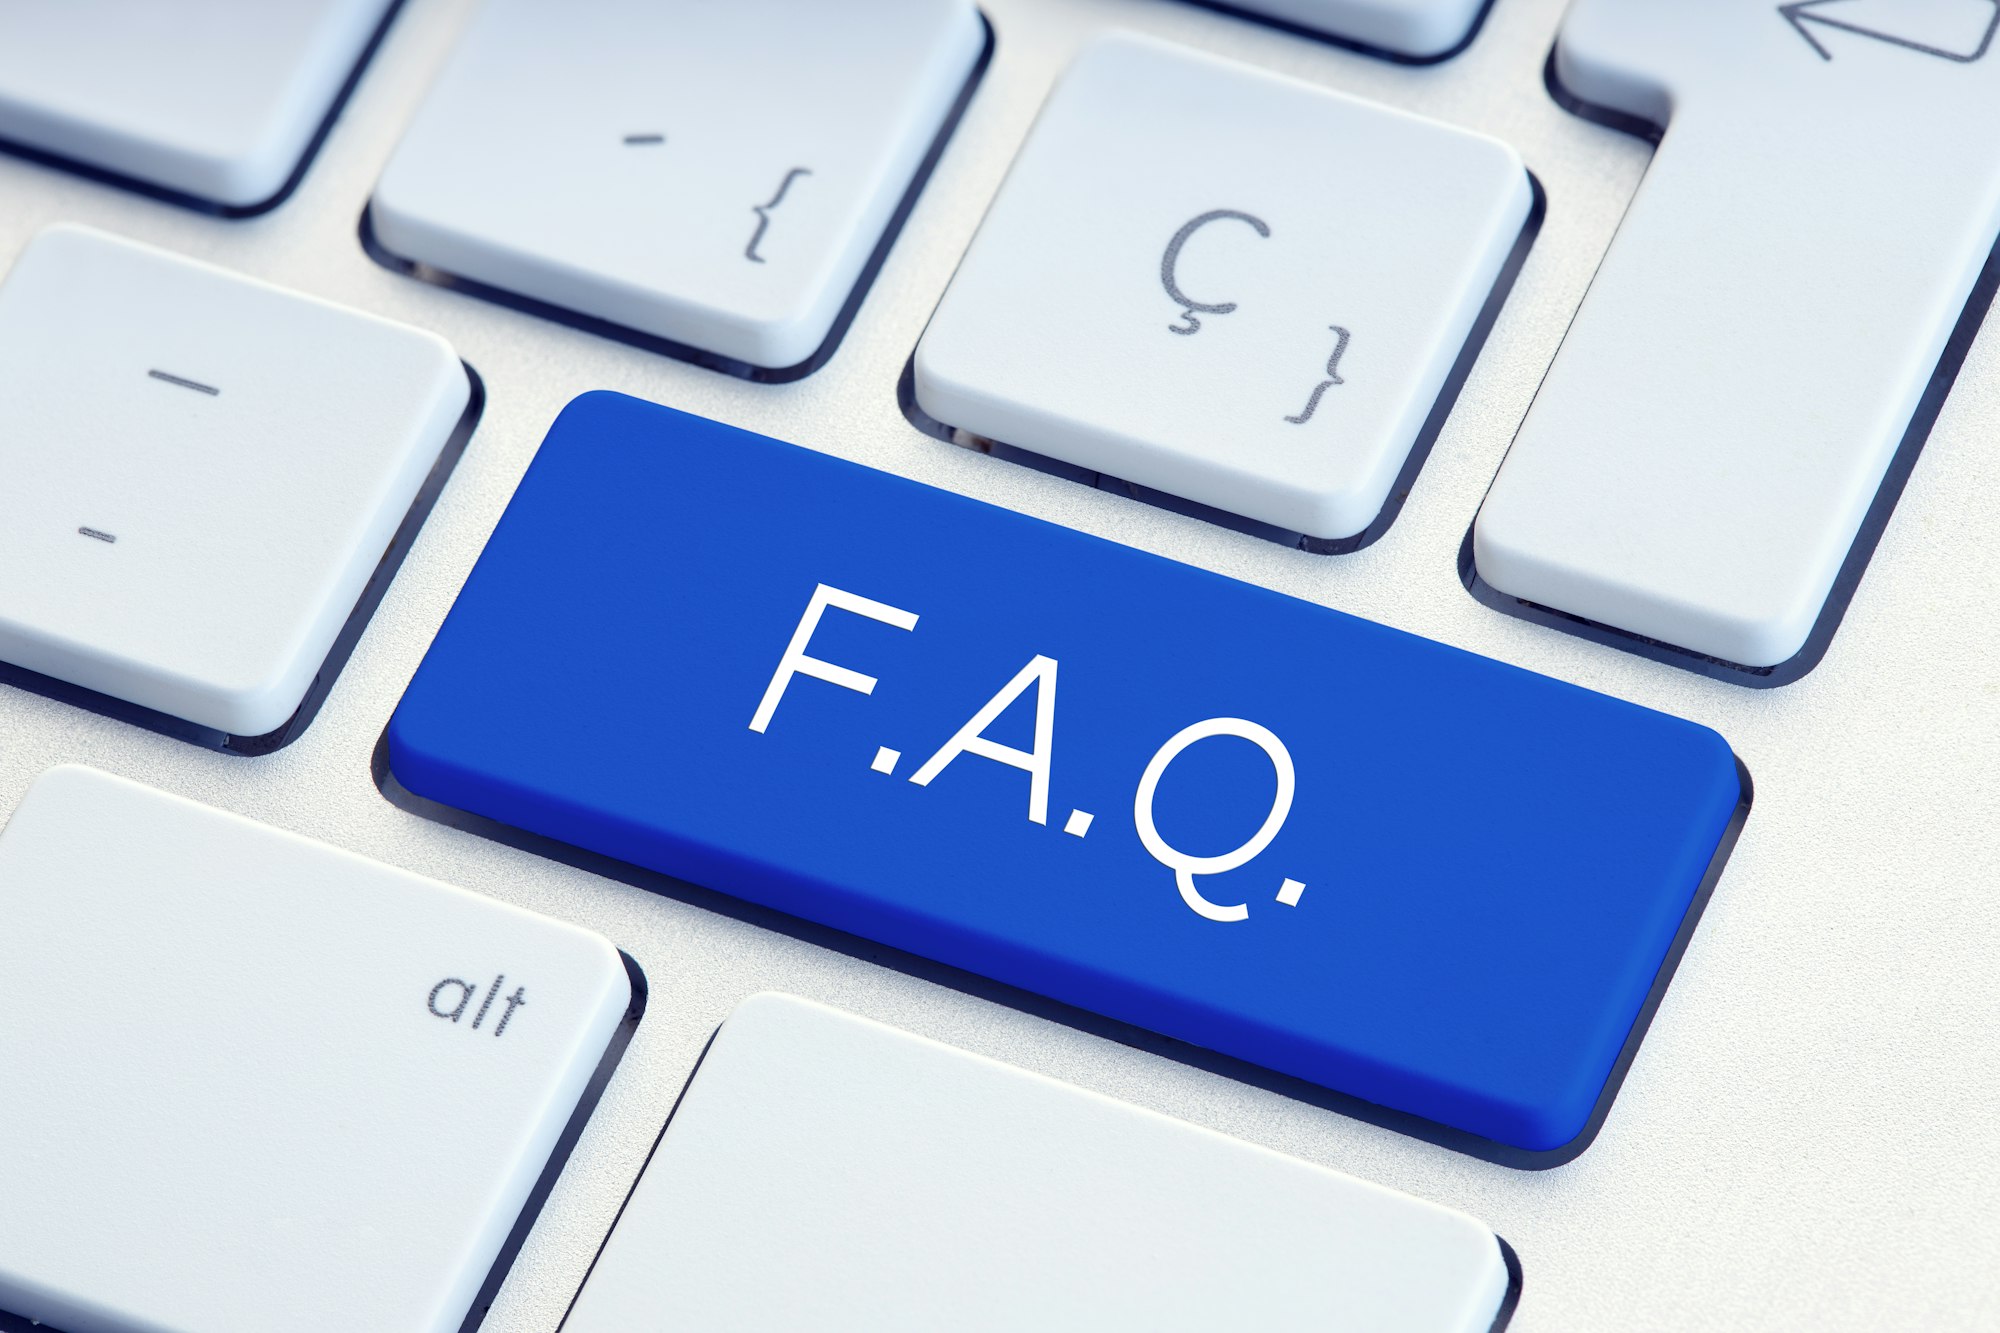 FAQ Getting Started: Your Gateway to Digital Transformation 🚀📘 - Embark on your journey with our comprehensive guides designed to simplify ITIL, ITSM, Digital Transformation, AI, and more. Gain foundational knowledge, practical insights, and expert tips to navigate complex IT frameworks and methodologies. Click here to begin your path to excellence!